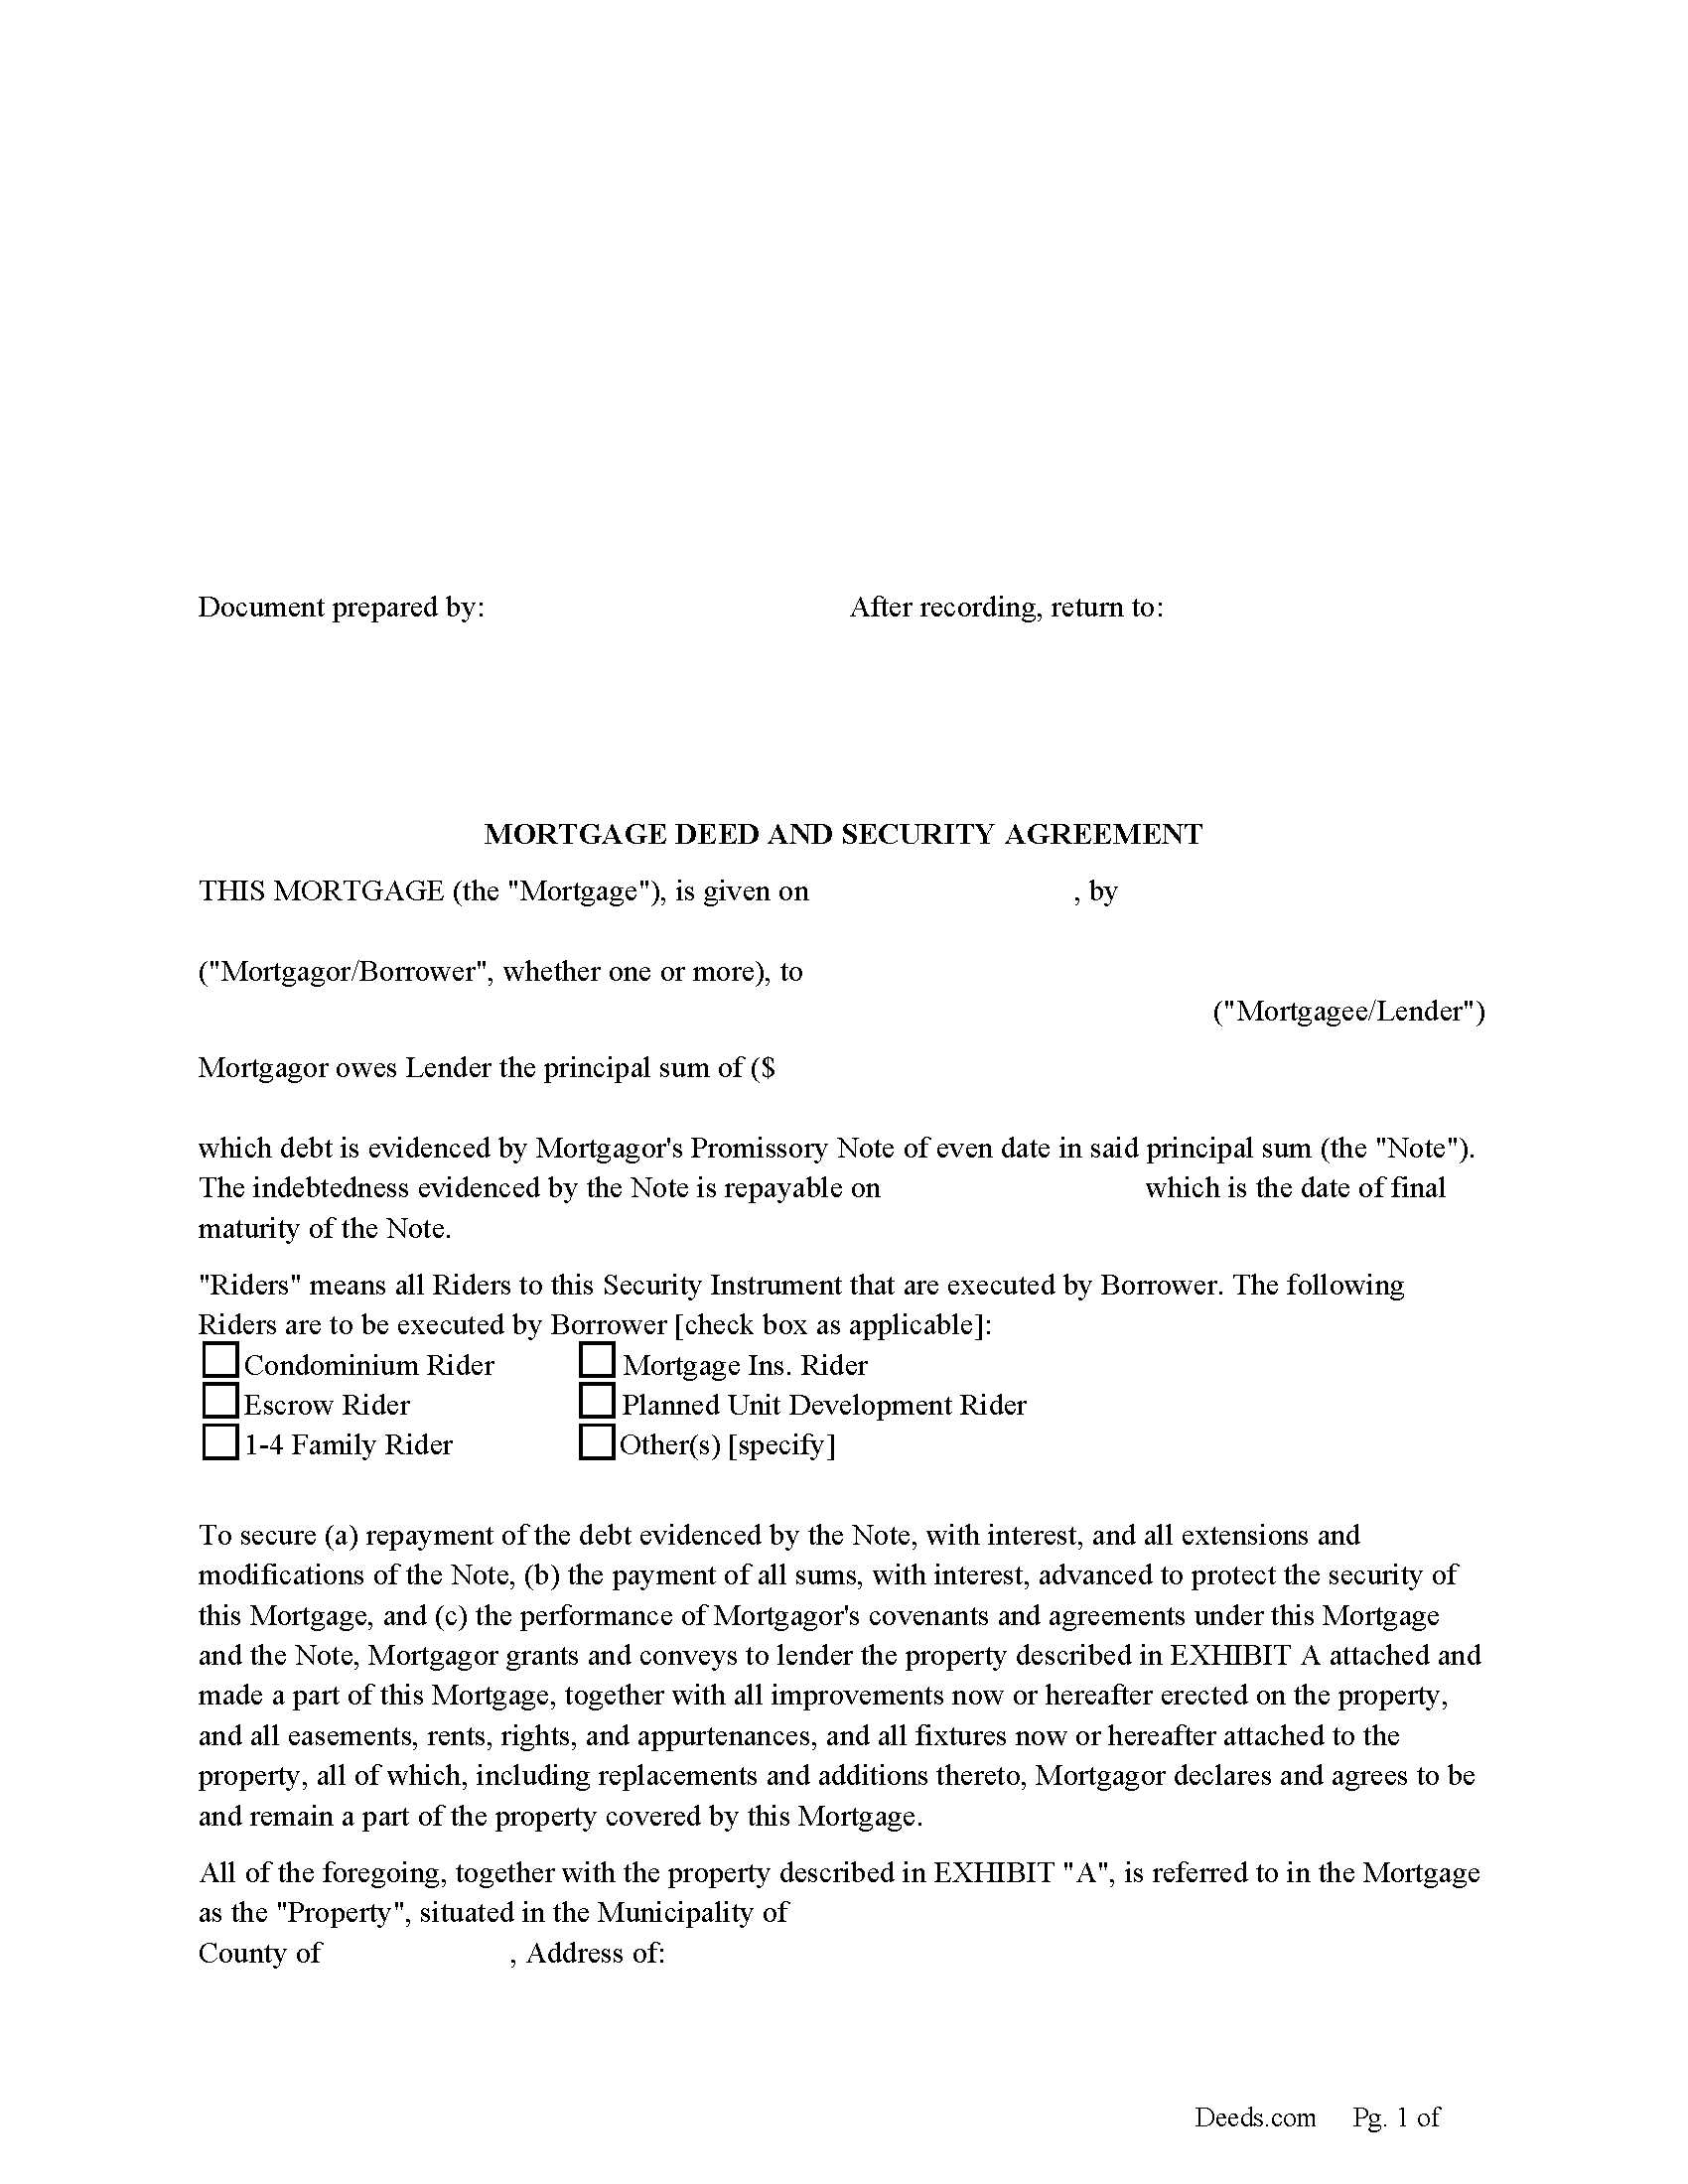 New Hampshire Mortgage Deed and Security Agreement Image